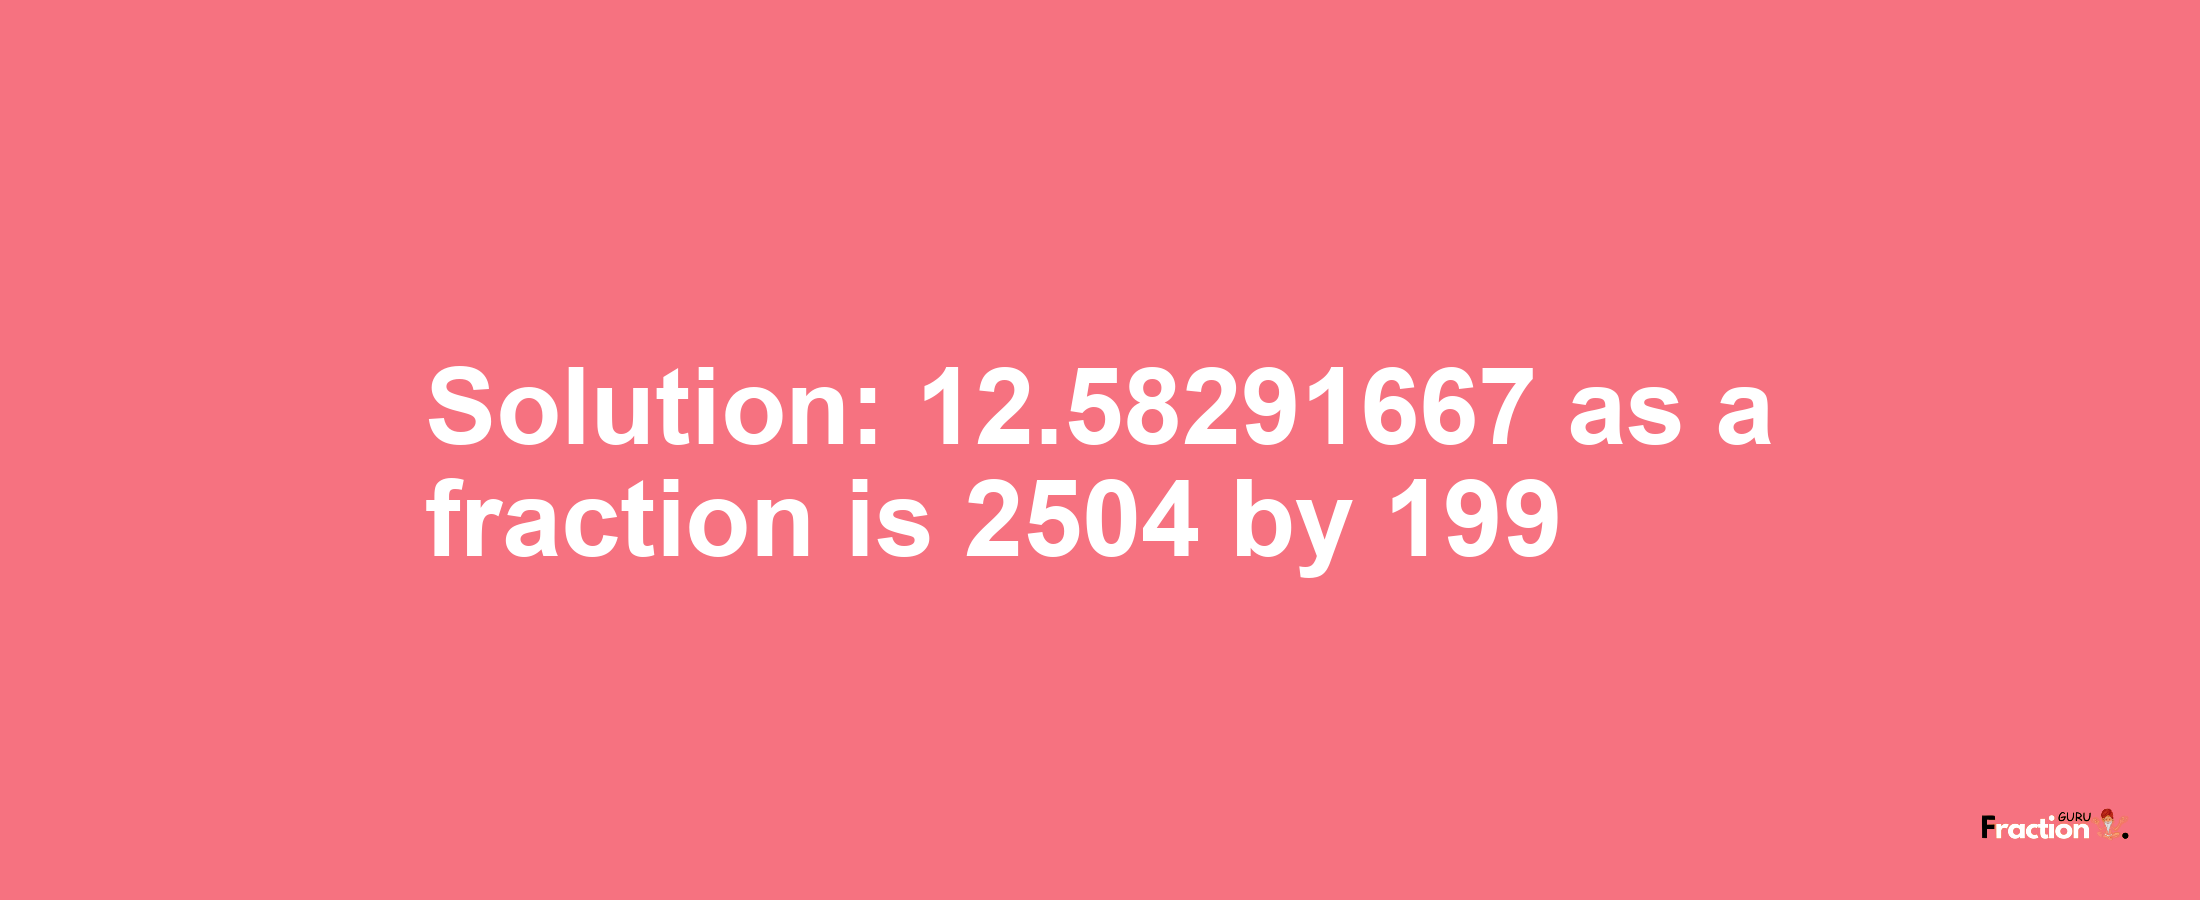 Solution:12.58291667 as a fraction is 2504/199